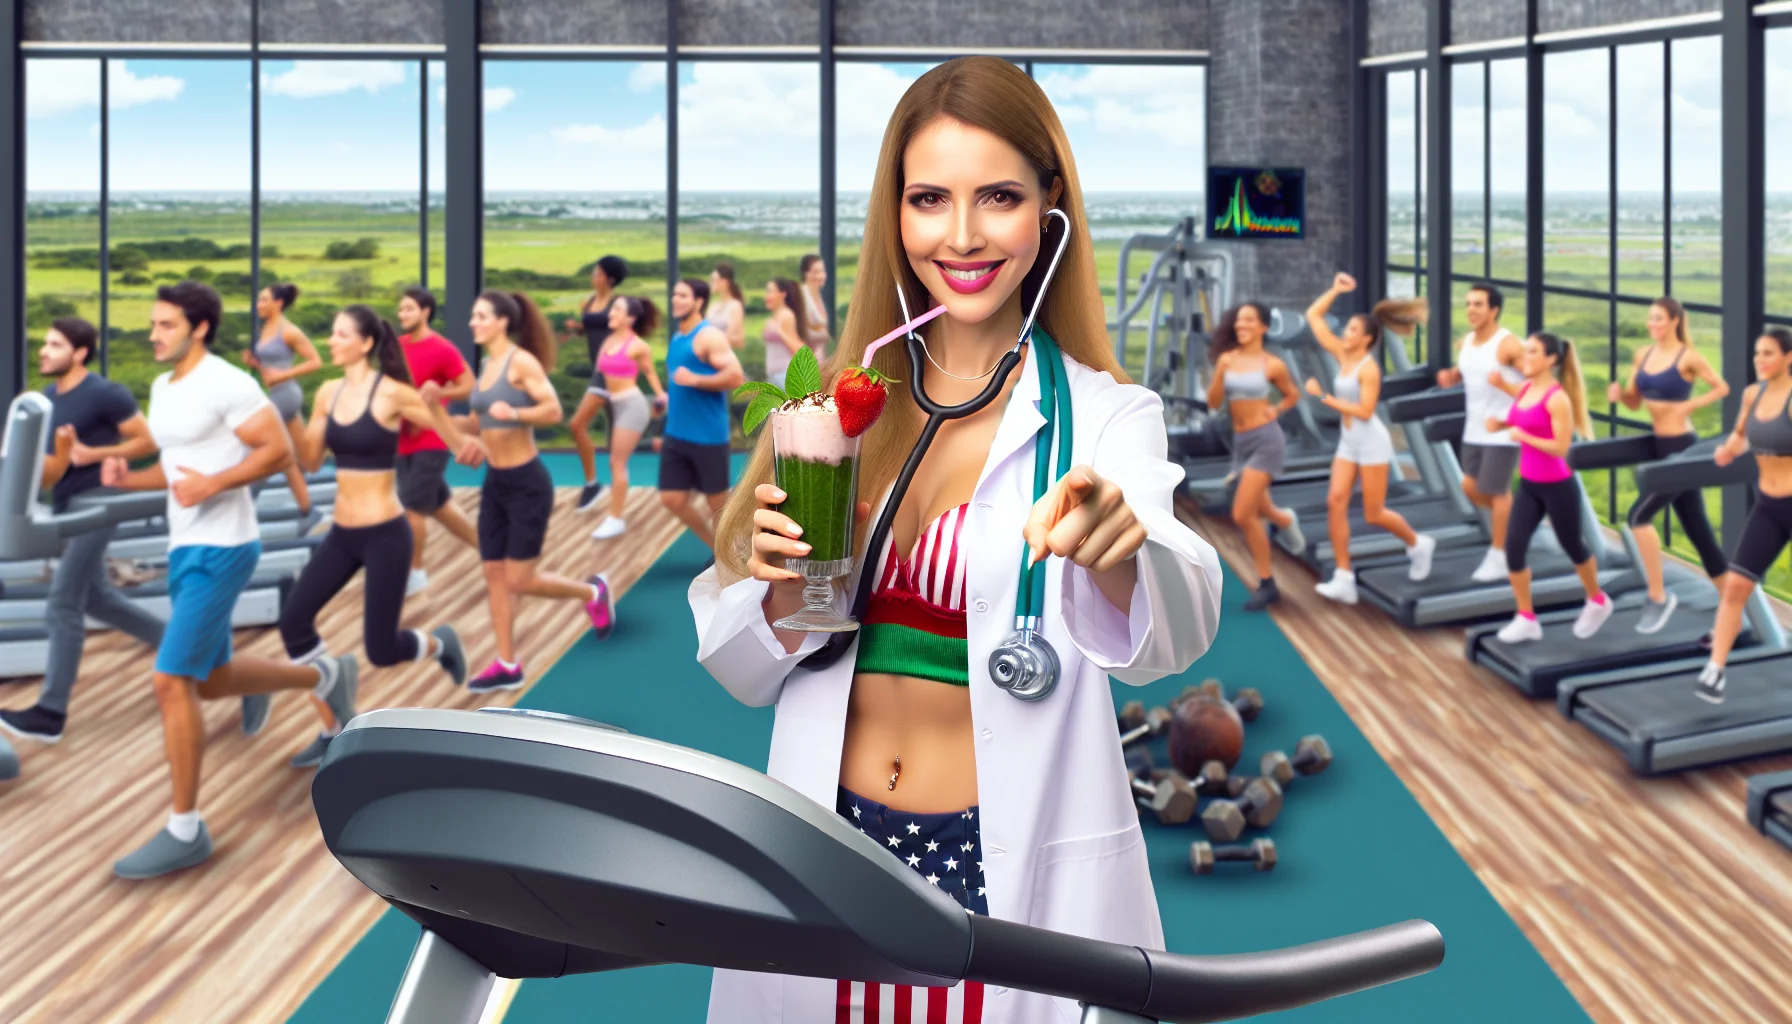 Create a realistic image of a determined and charismatic female doctor, with an enchanting Brazilian personality, in a humorous scenario encouraging people to exercise. She can be seen wearing a lab coat, holding a dumbbell in one hand and a healthy smoothie in the other, standing next to a treadmill. The backdrop is a lively gym environment filled with people of all genders and descents partaking in various fitness activities.